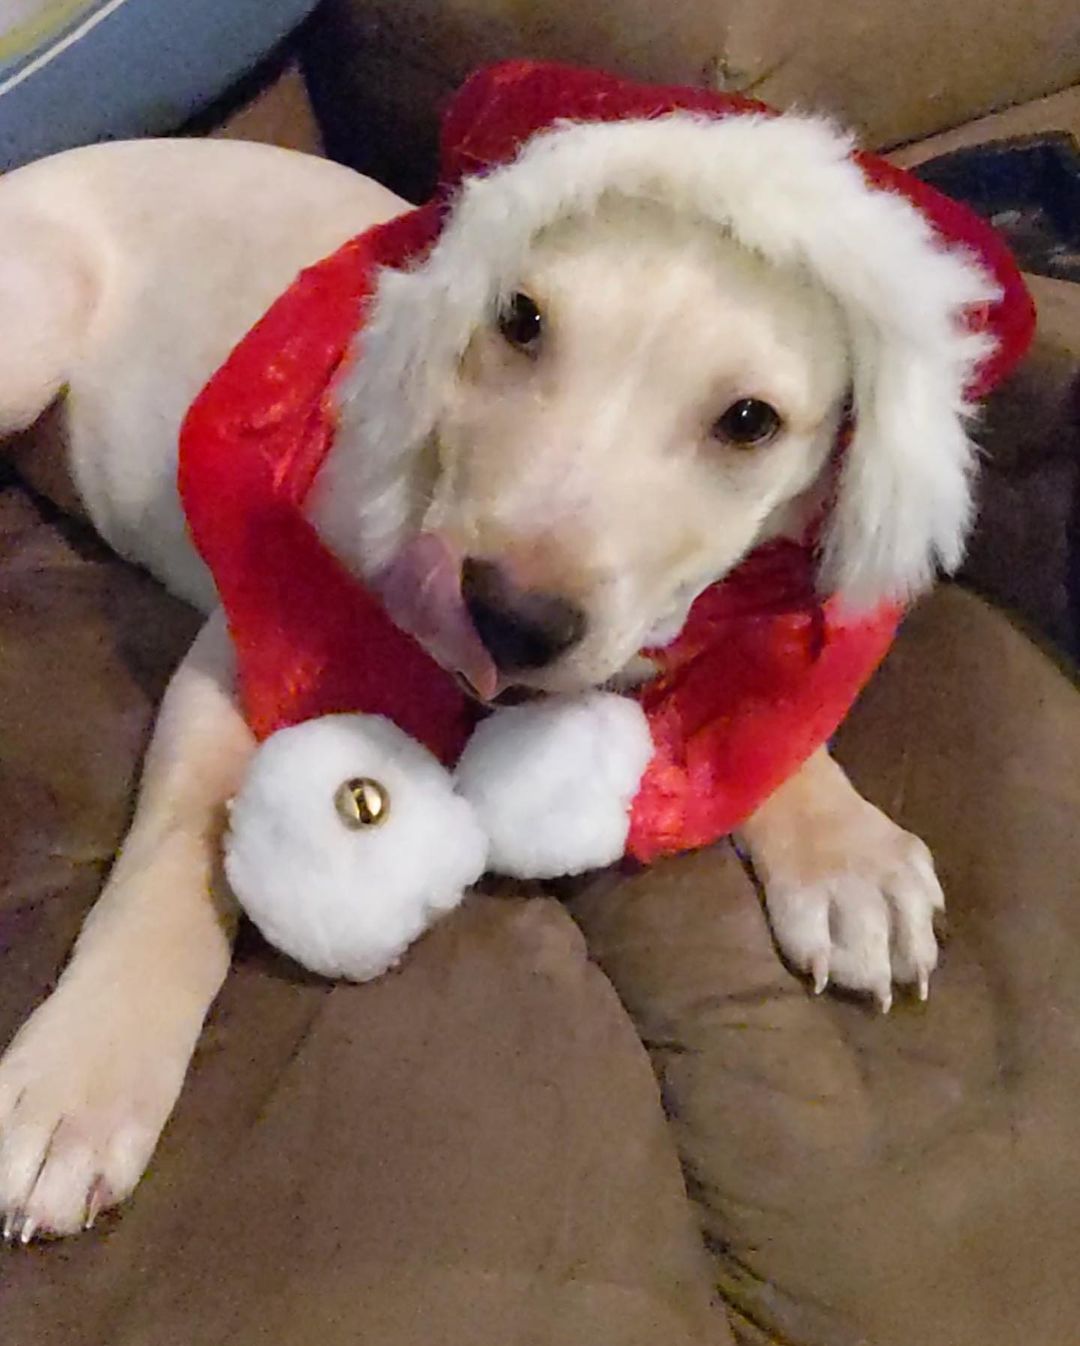 Butters is having a great time getting ready to deliver presents for Christmas 🤣🥰

💕
Get your applications in!
https://www.causendogrescue.org/adoption-application.html 
🐾
💕
🐾
We only do meet and greets for approved applications.

Adoption fee is $250.

All dogs will be Up-to-date on Shots, worming, Spayed/Neutered and Microchipped.  We will also do random, periodic vet checks to ensure all dogs adopted from us continue to have the best care.  We will check for any follow up visits needed and that they are on a monthly Heartworm Prevention.

If you rent or own a home, we prefer you to have a fenced in yard. 

Apartment living is also ok but prefer a fenced in area if close to the road.
All adults in the home will need to know they are getting a dog and will need to sign the adoption agreement.
We do not adopt to college students with multiple roommates. 
Military will need to provide a backup plan.
We require all pets in the home to be spay and/or neutered. Because too many dogs are being killed, due to there not being enough homes per dog in need. Only the lucky ones end up here.